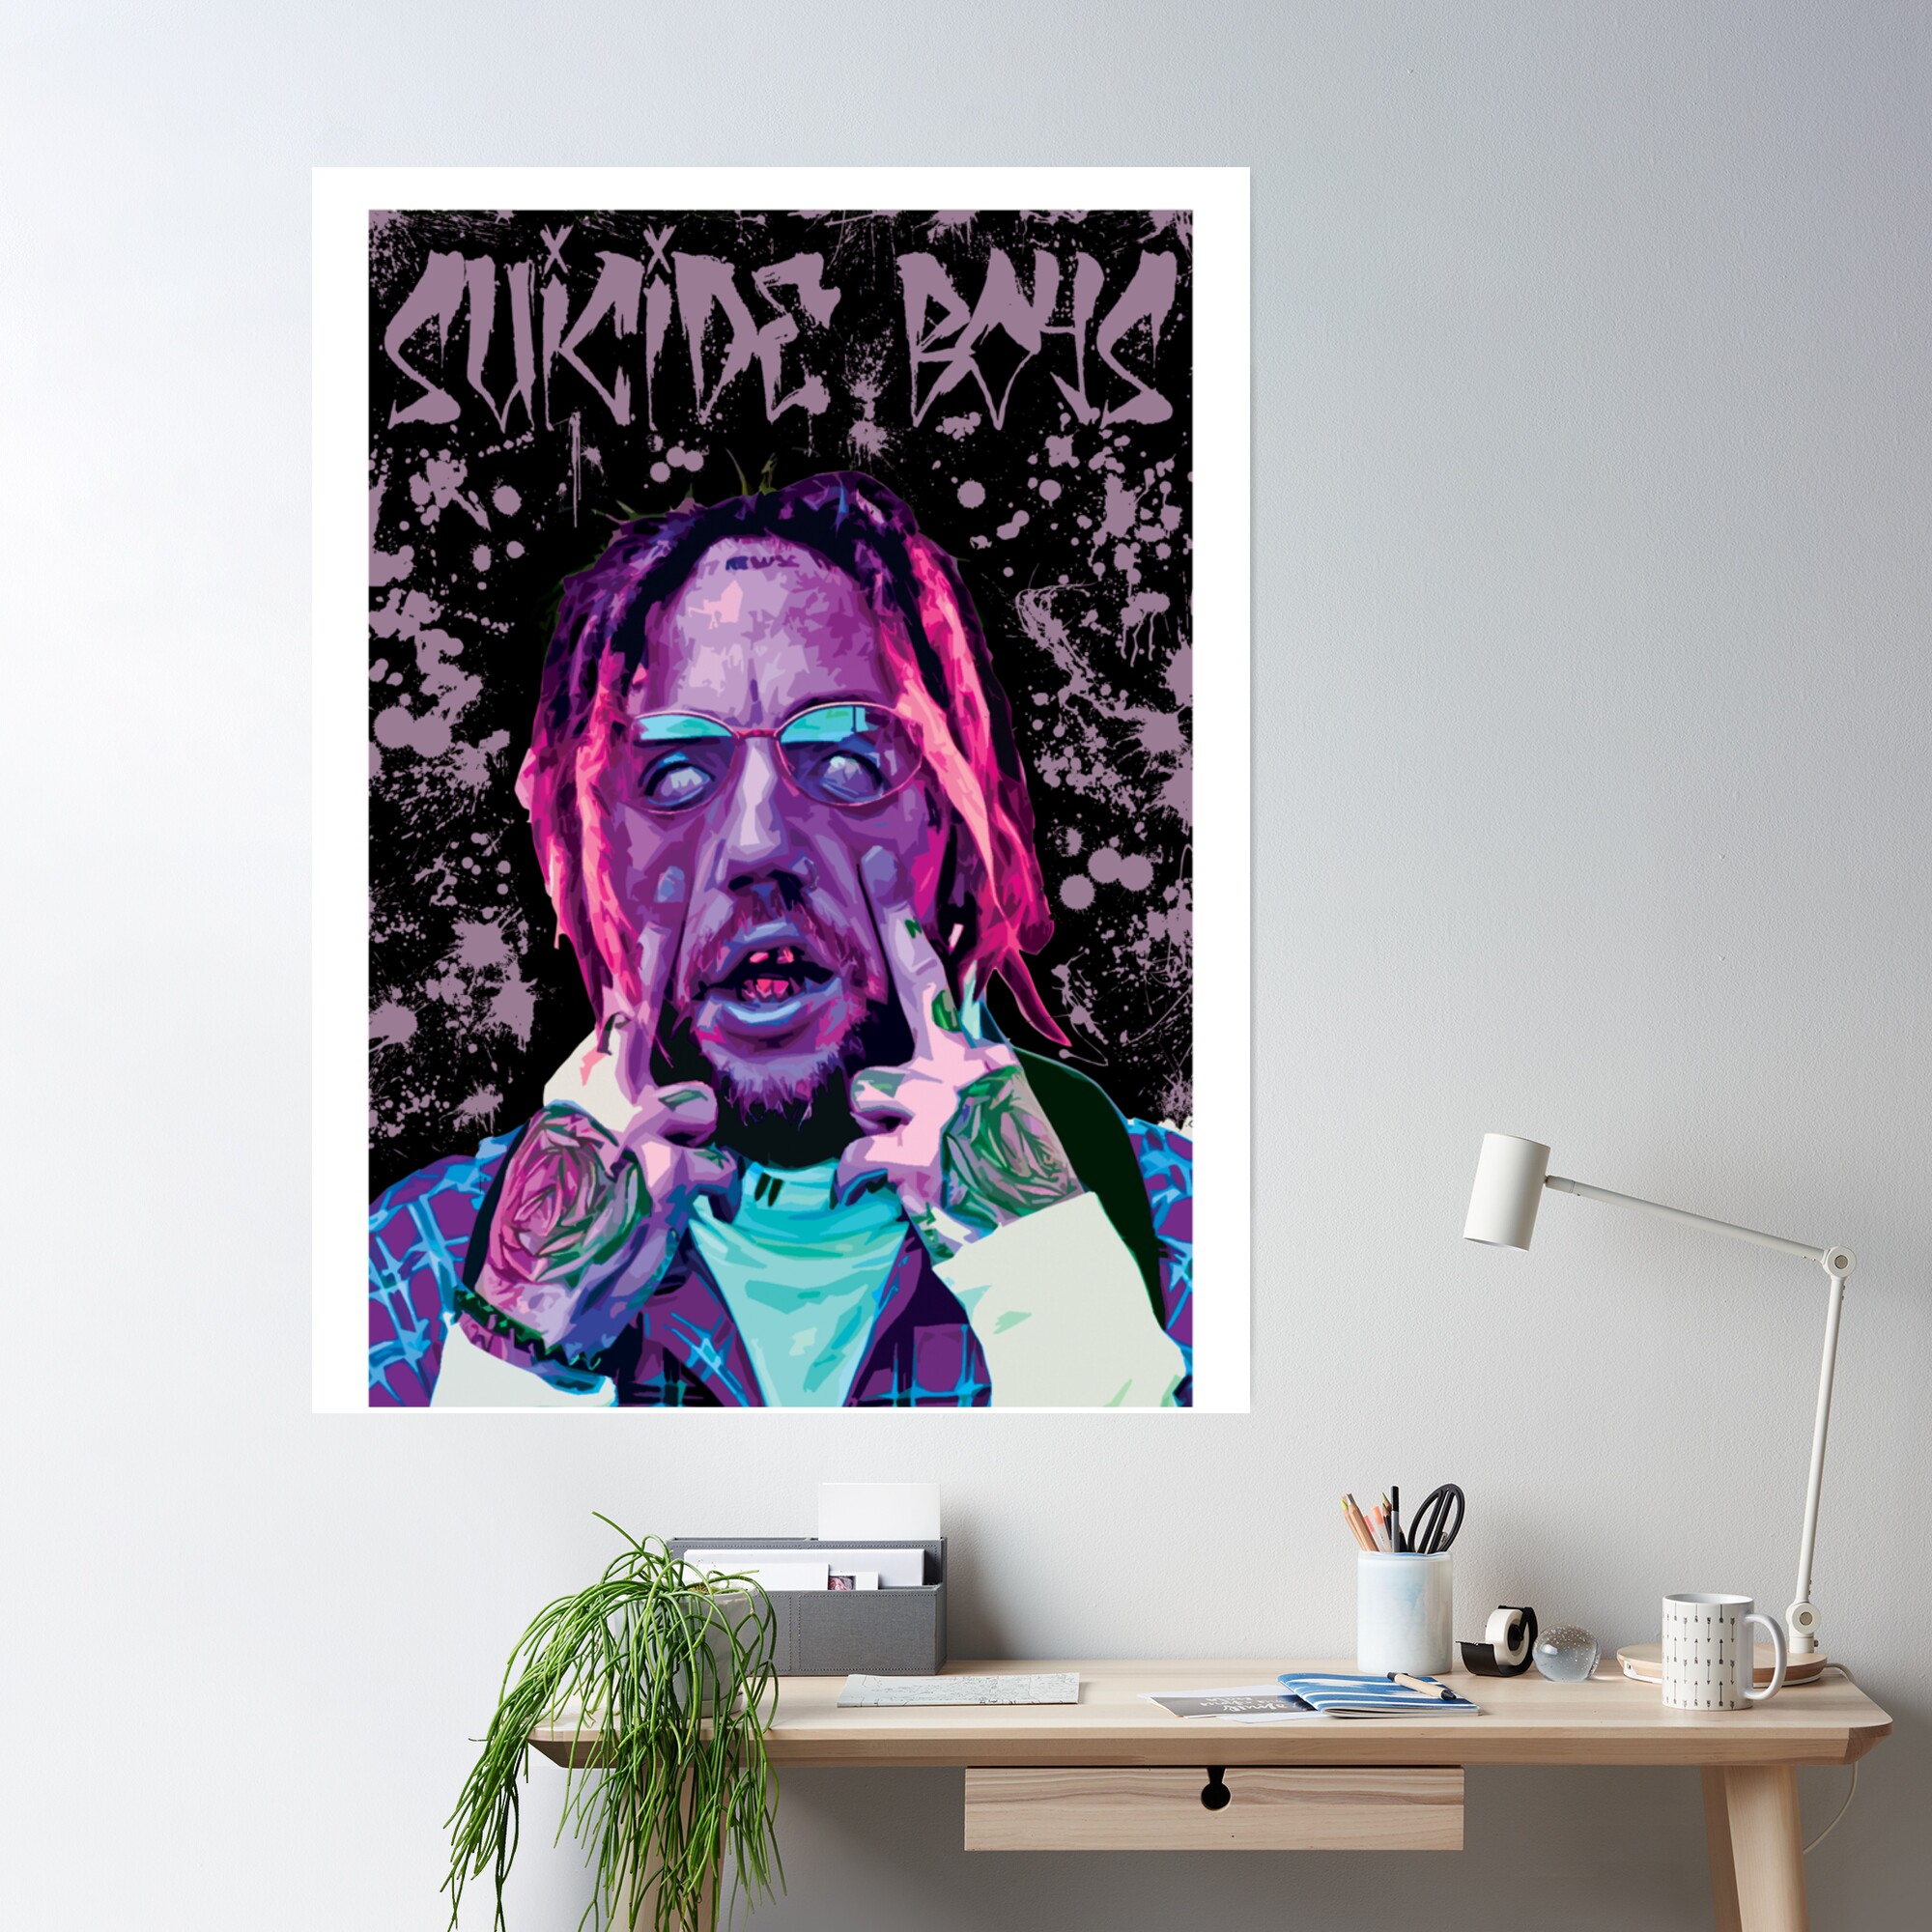 cposterlargesquare product2000x2000 16 - Suicideboys Shop